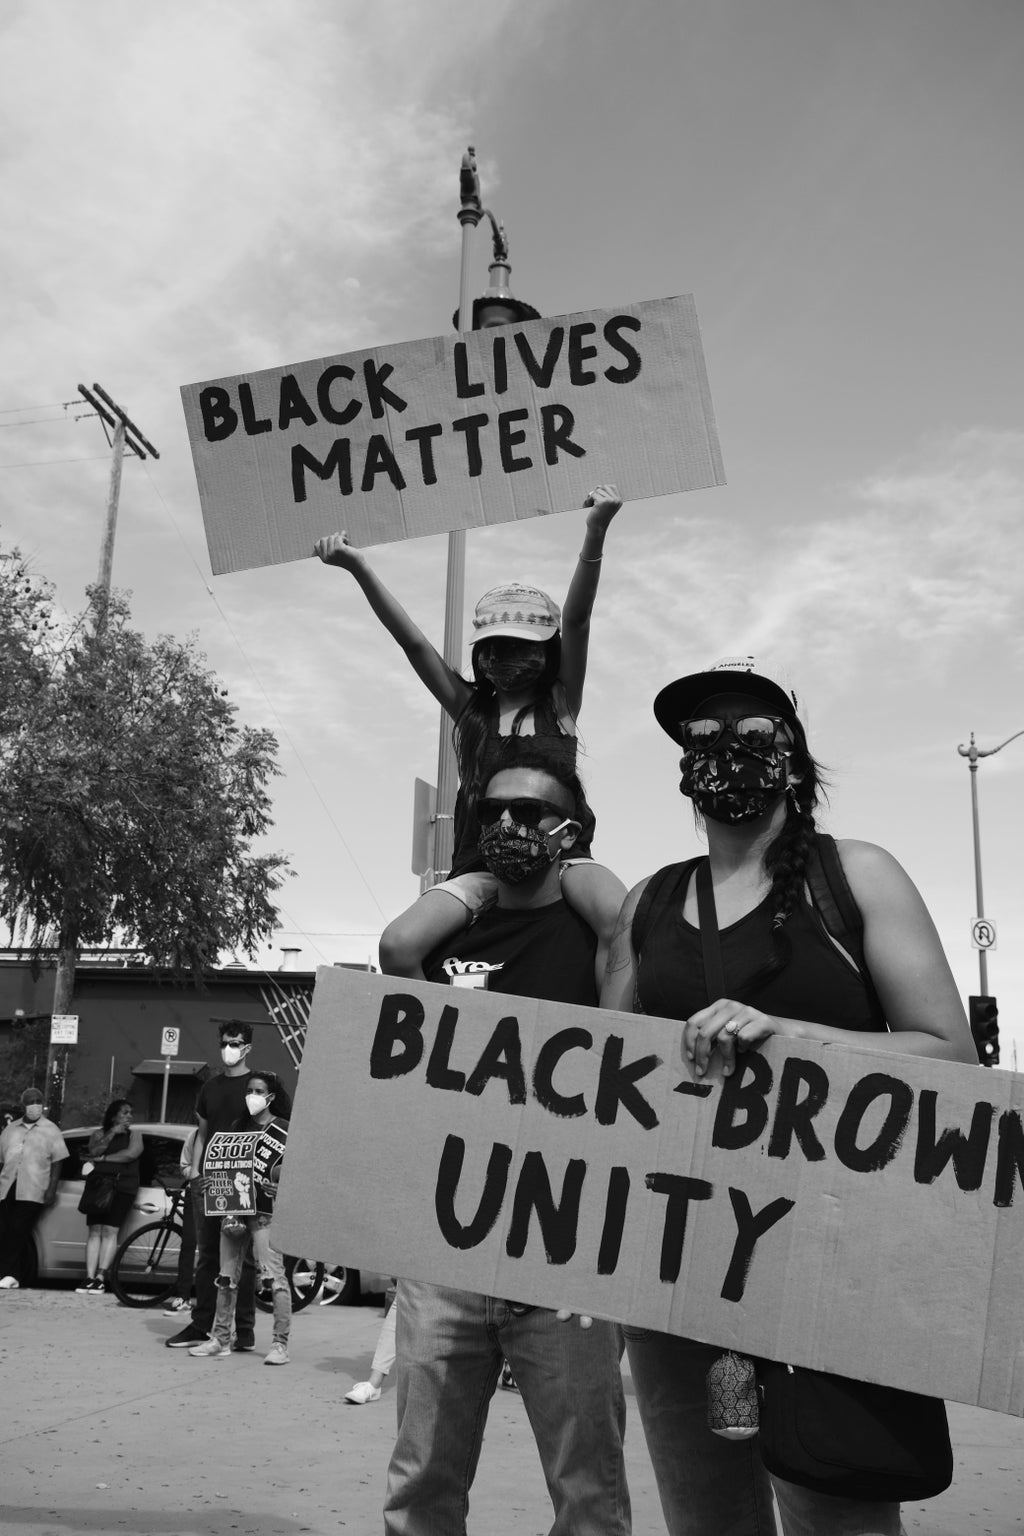 Protesters with Black Lives Matter/Black-Brown Unity signs